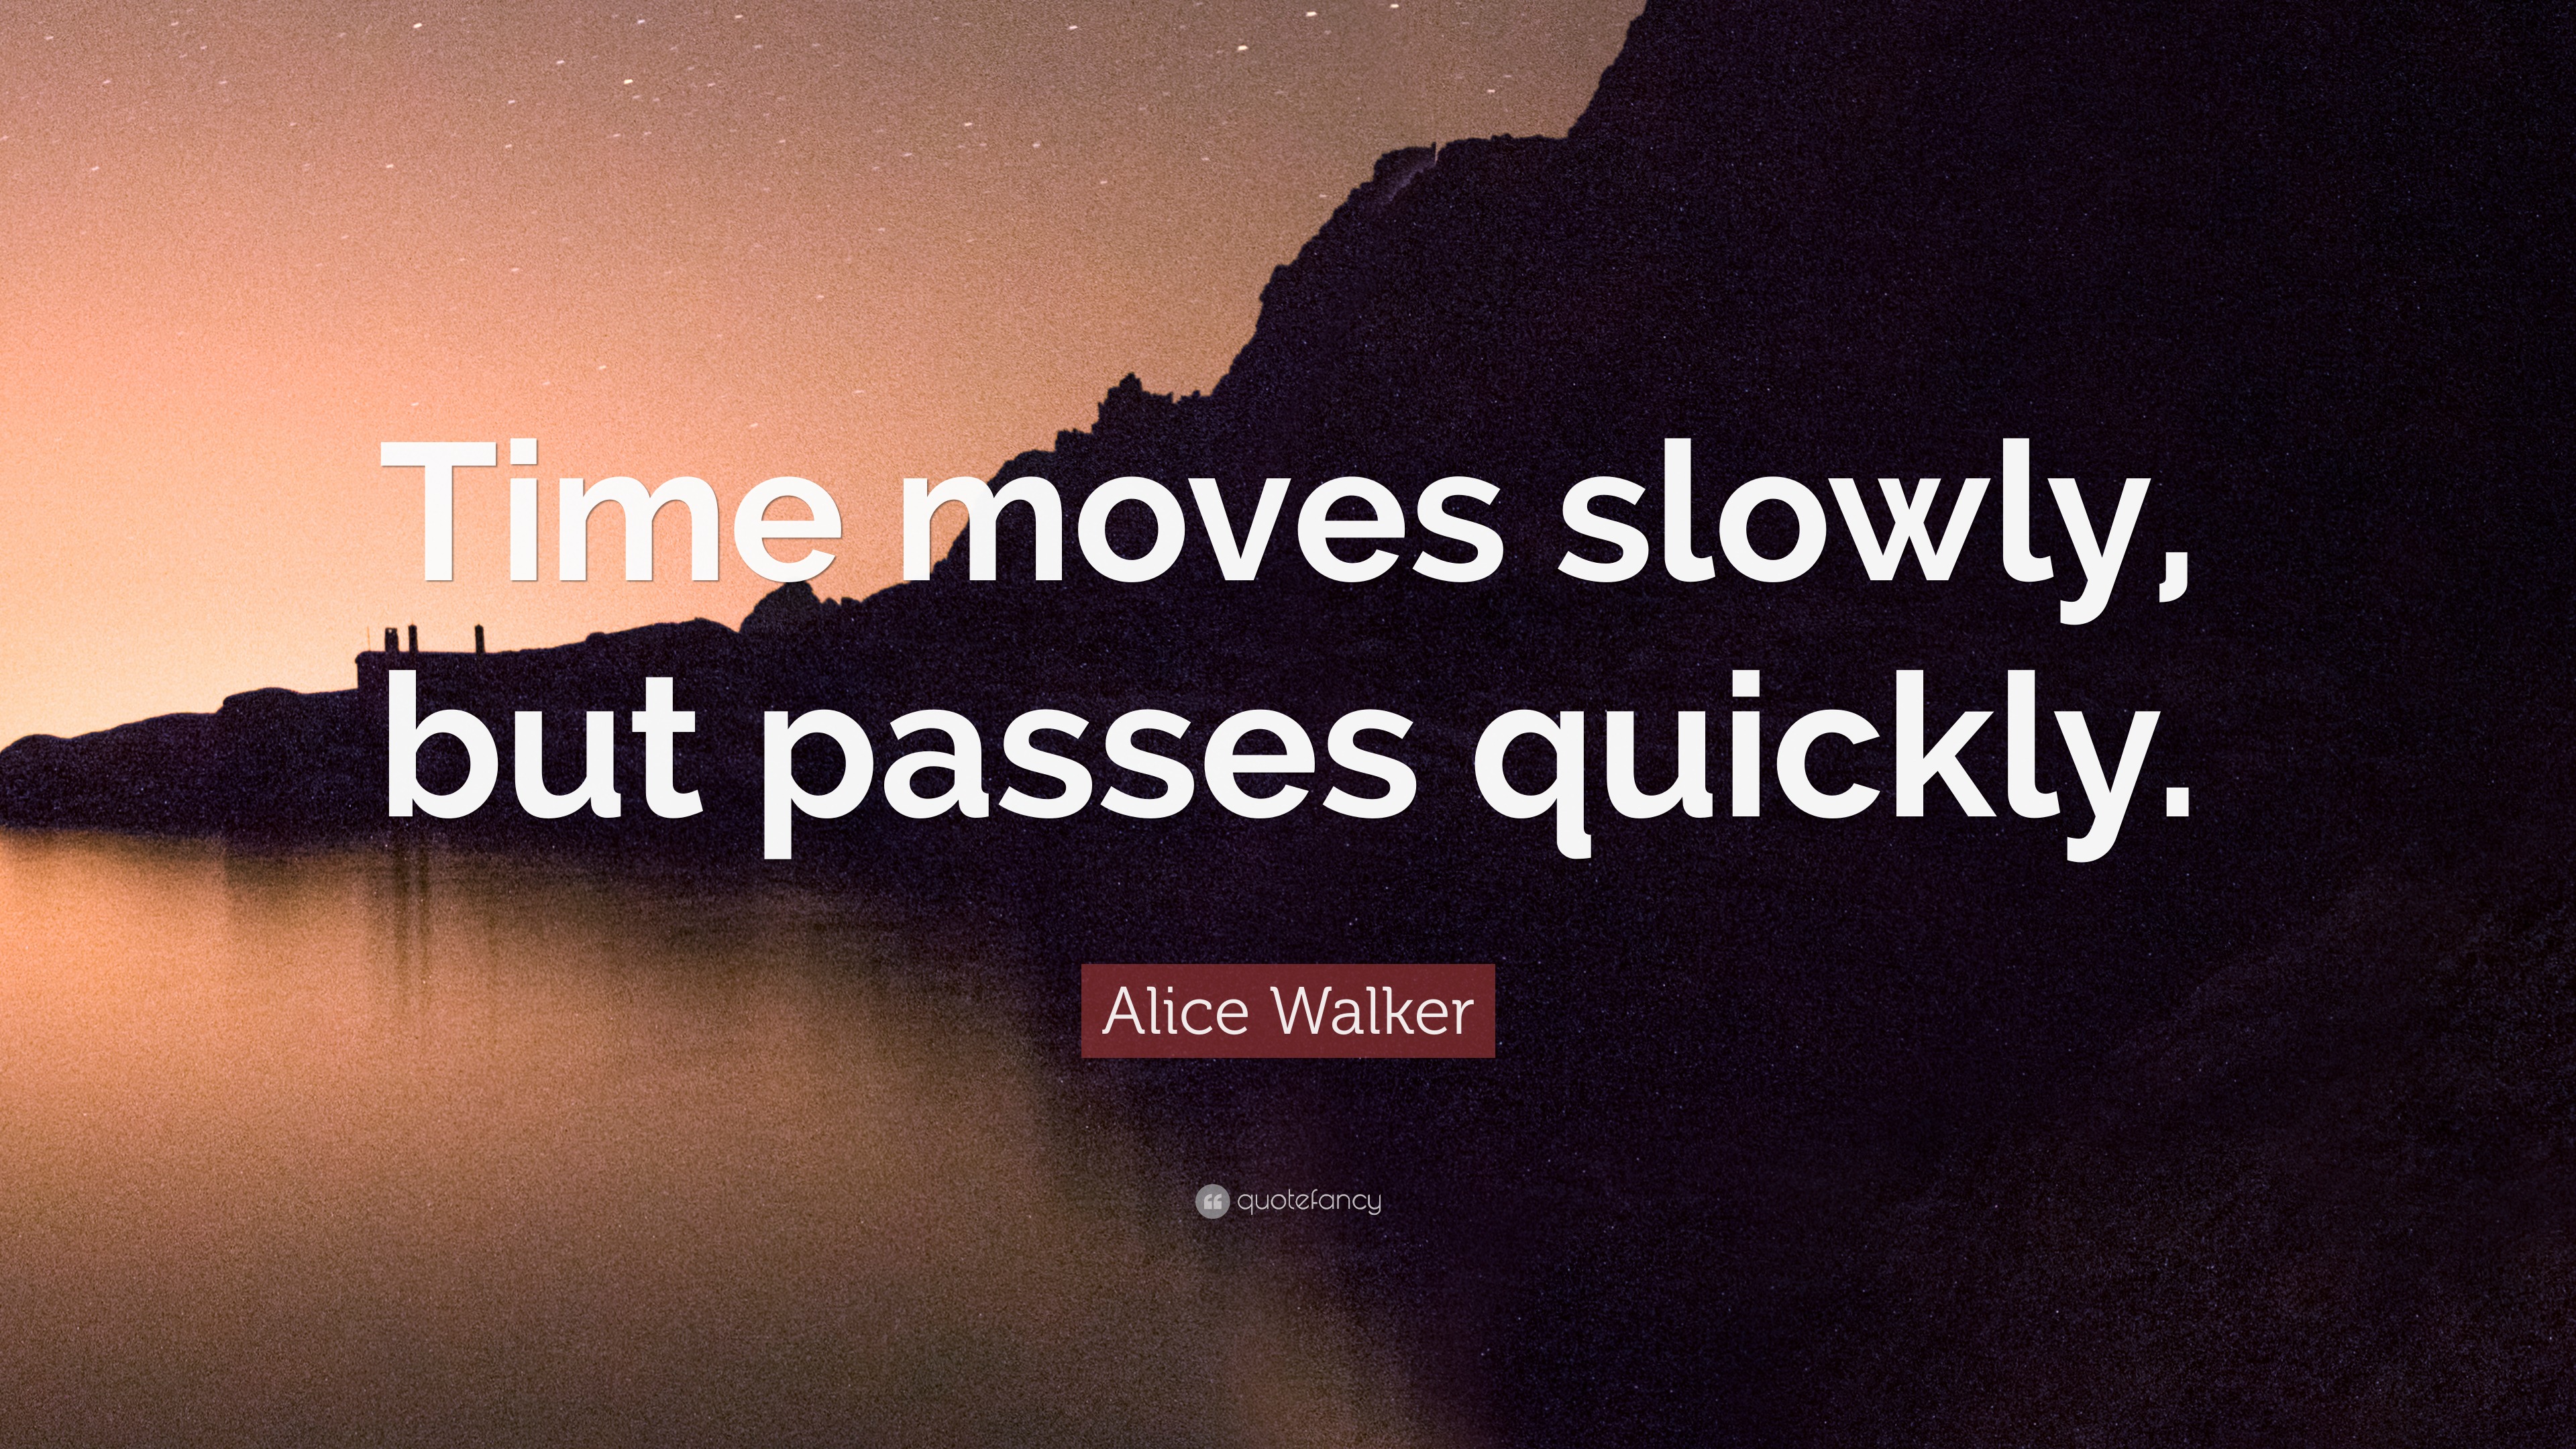 Alice Walker Quote “Time moves slowly, but passes quickly.”